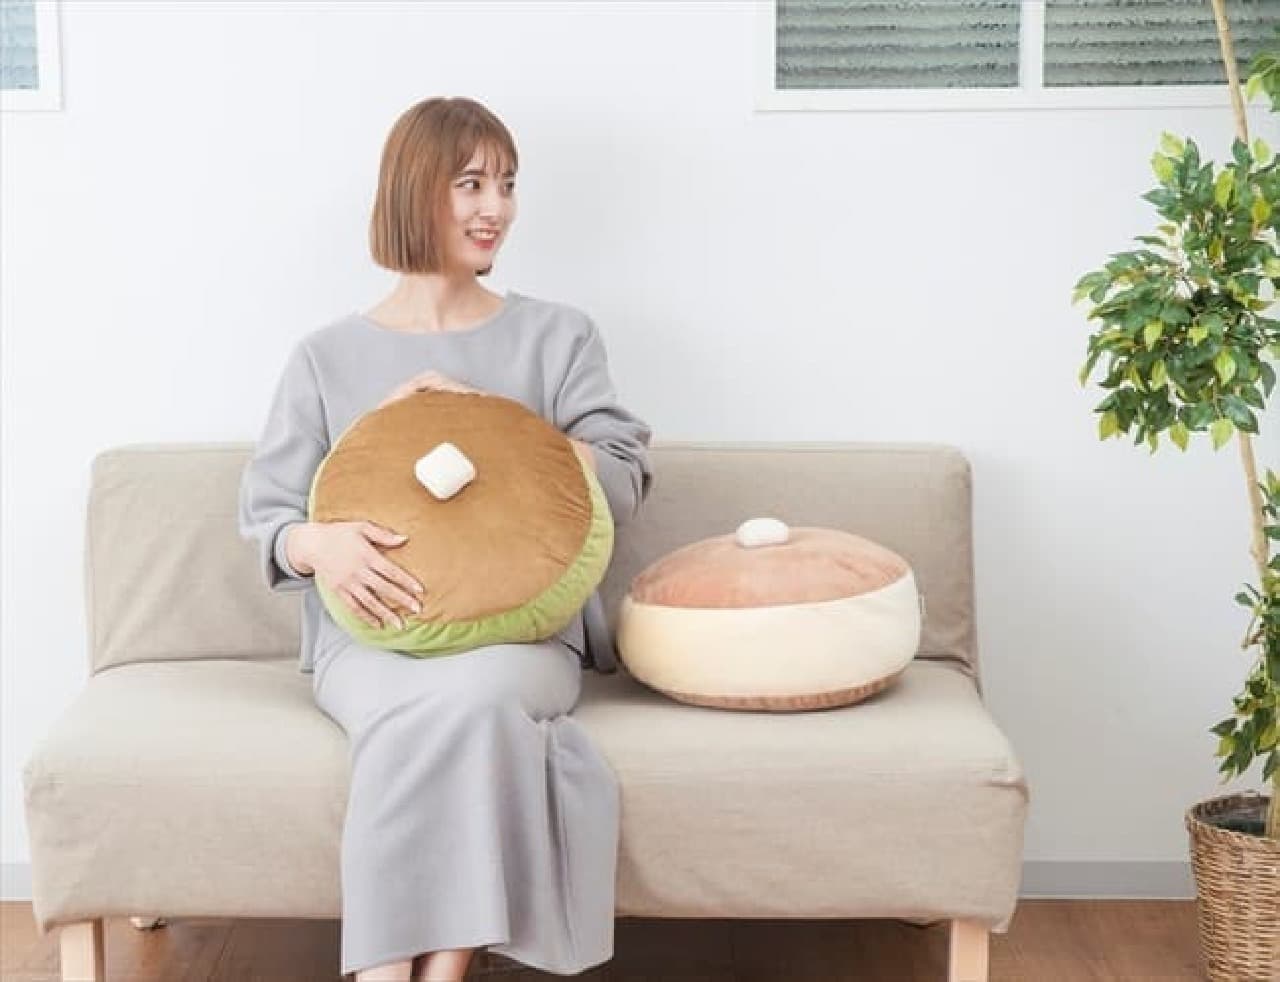 "Panque Cushion" at Villevan --French bread-shaped body pillow